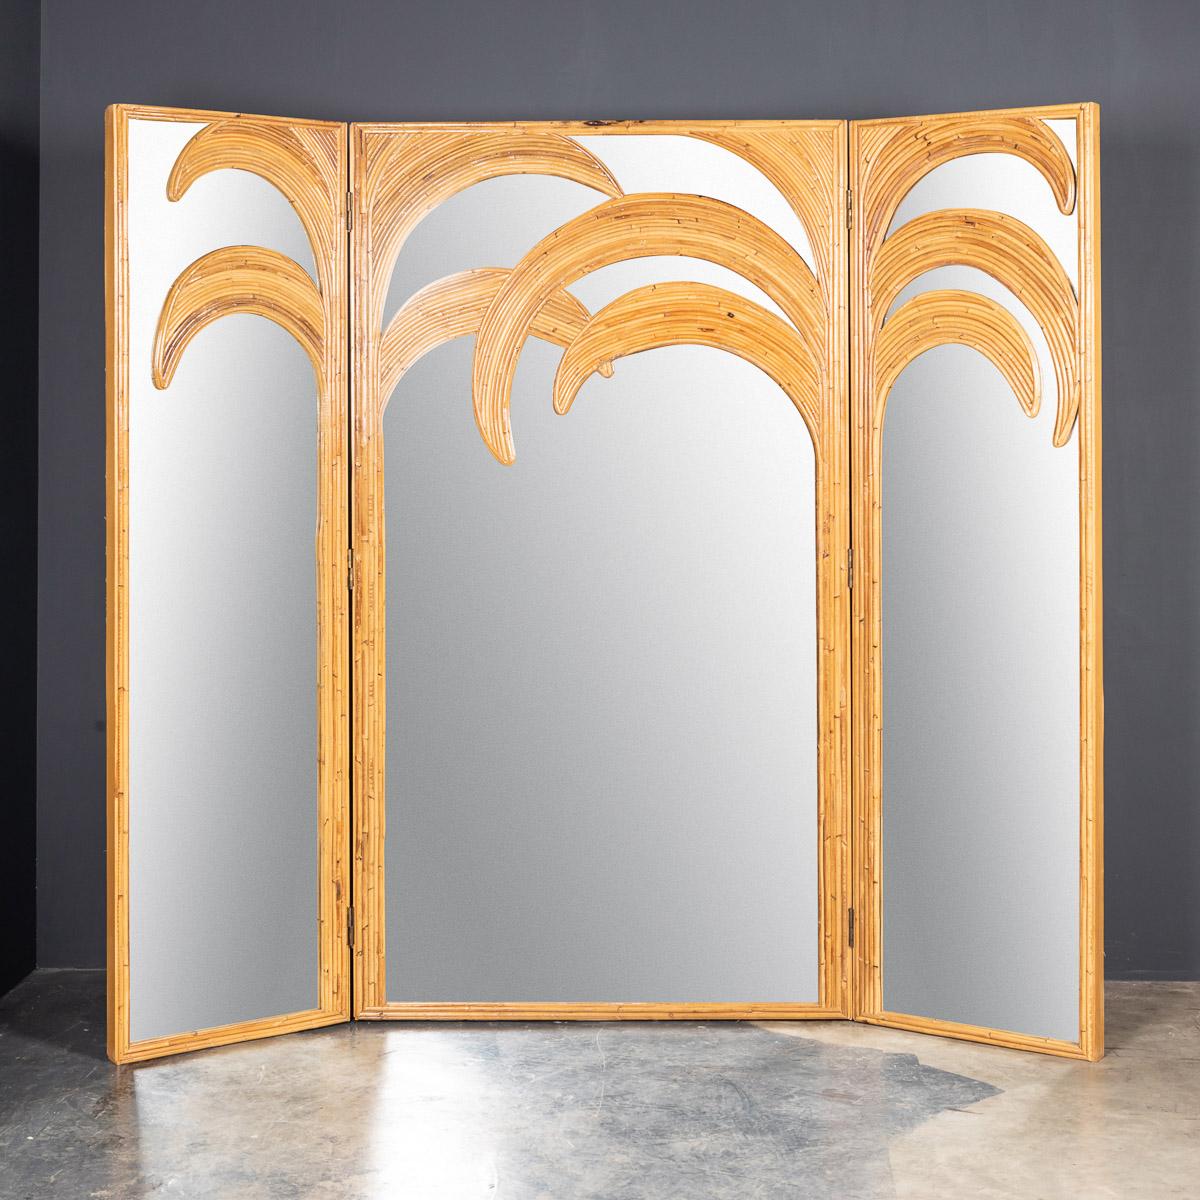 Striking 20th Century Italian mirrored screen from the 'Parma' series, by Vivai del Sud bamboo. This exquisite screen consists of bamboo palm tree motif inlay on a 3-panel mirrored screen. In the spirit of Vivai del Sud, the use of trompe l'oeil